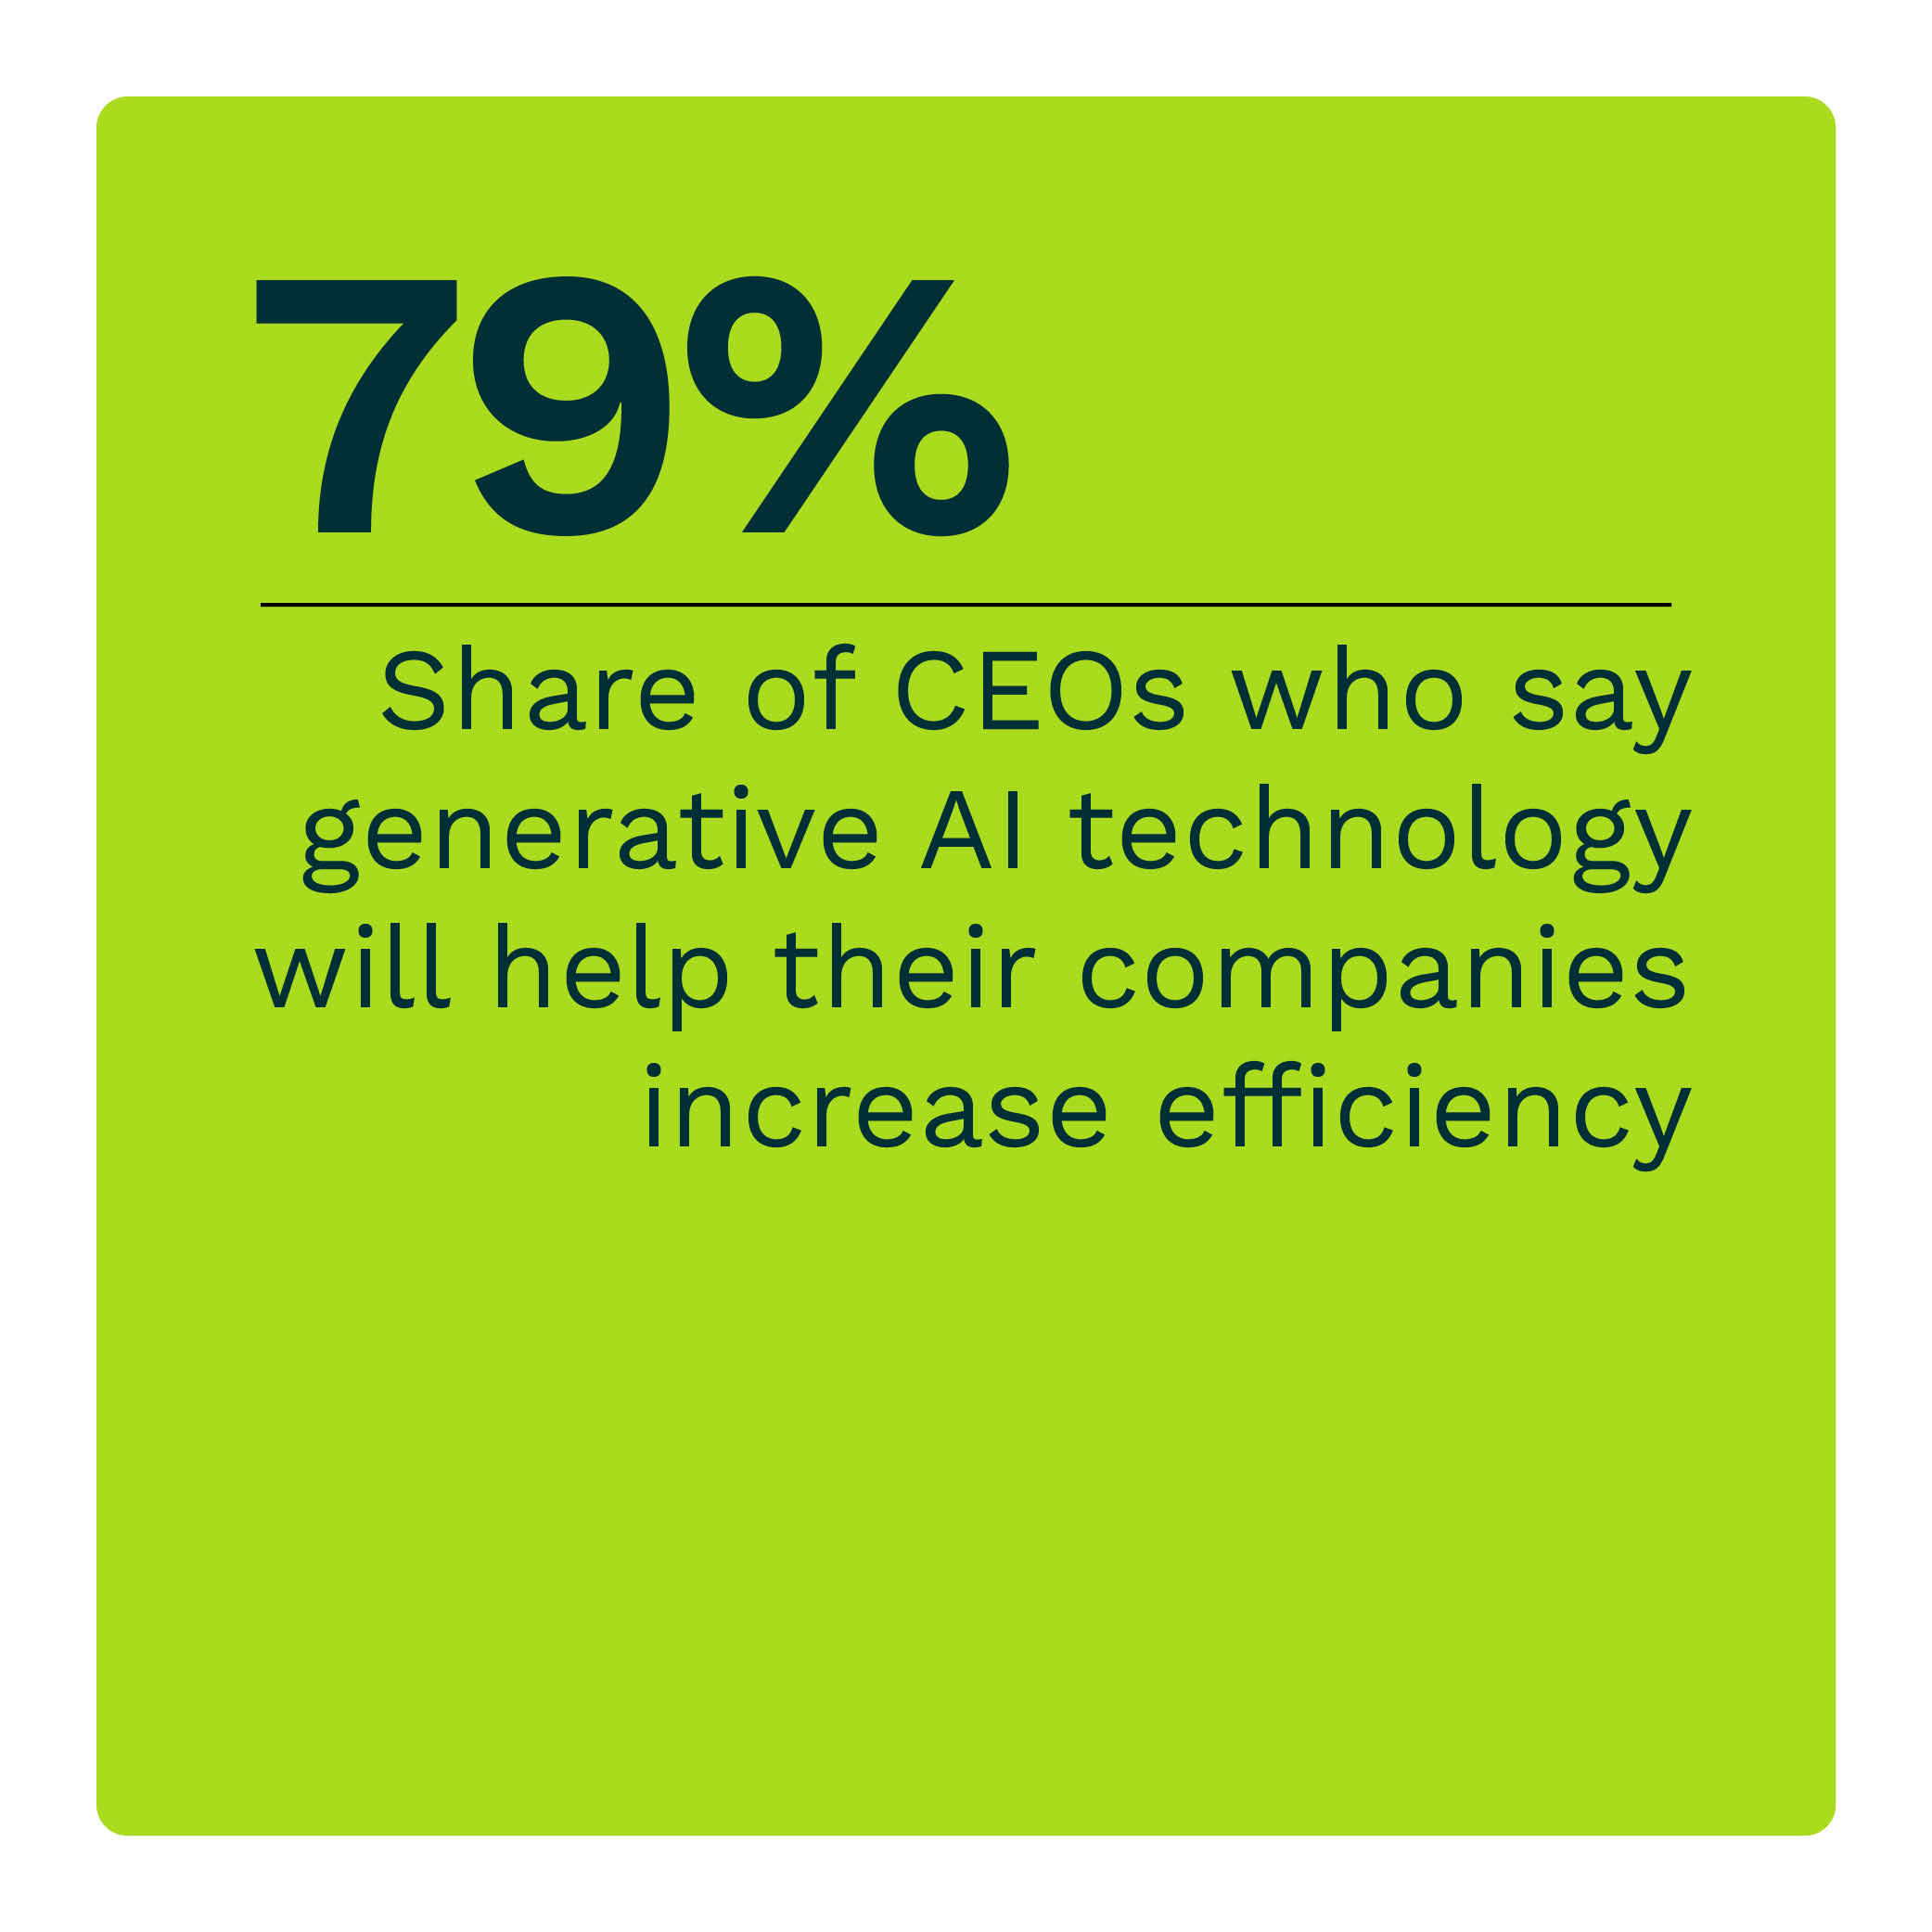 79%: Share of CEOs who say generative AI technology will help their companies increase efficiency